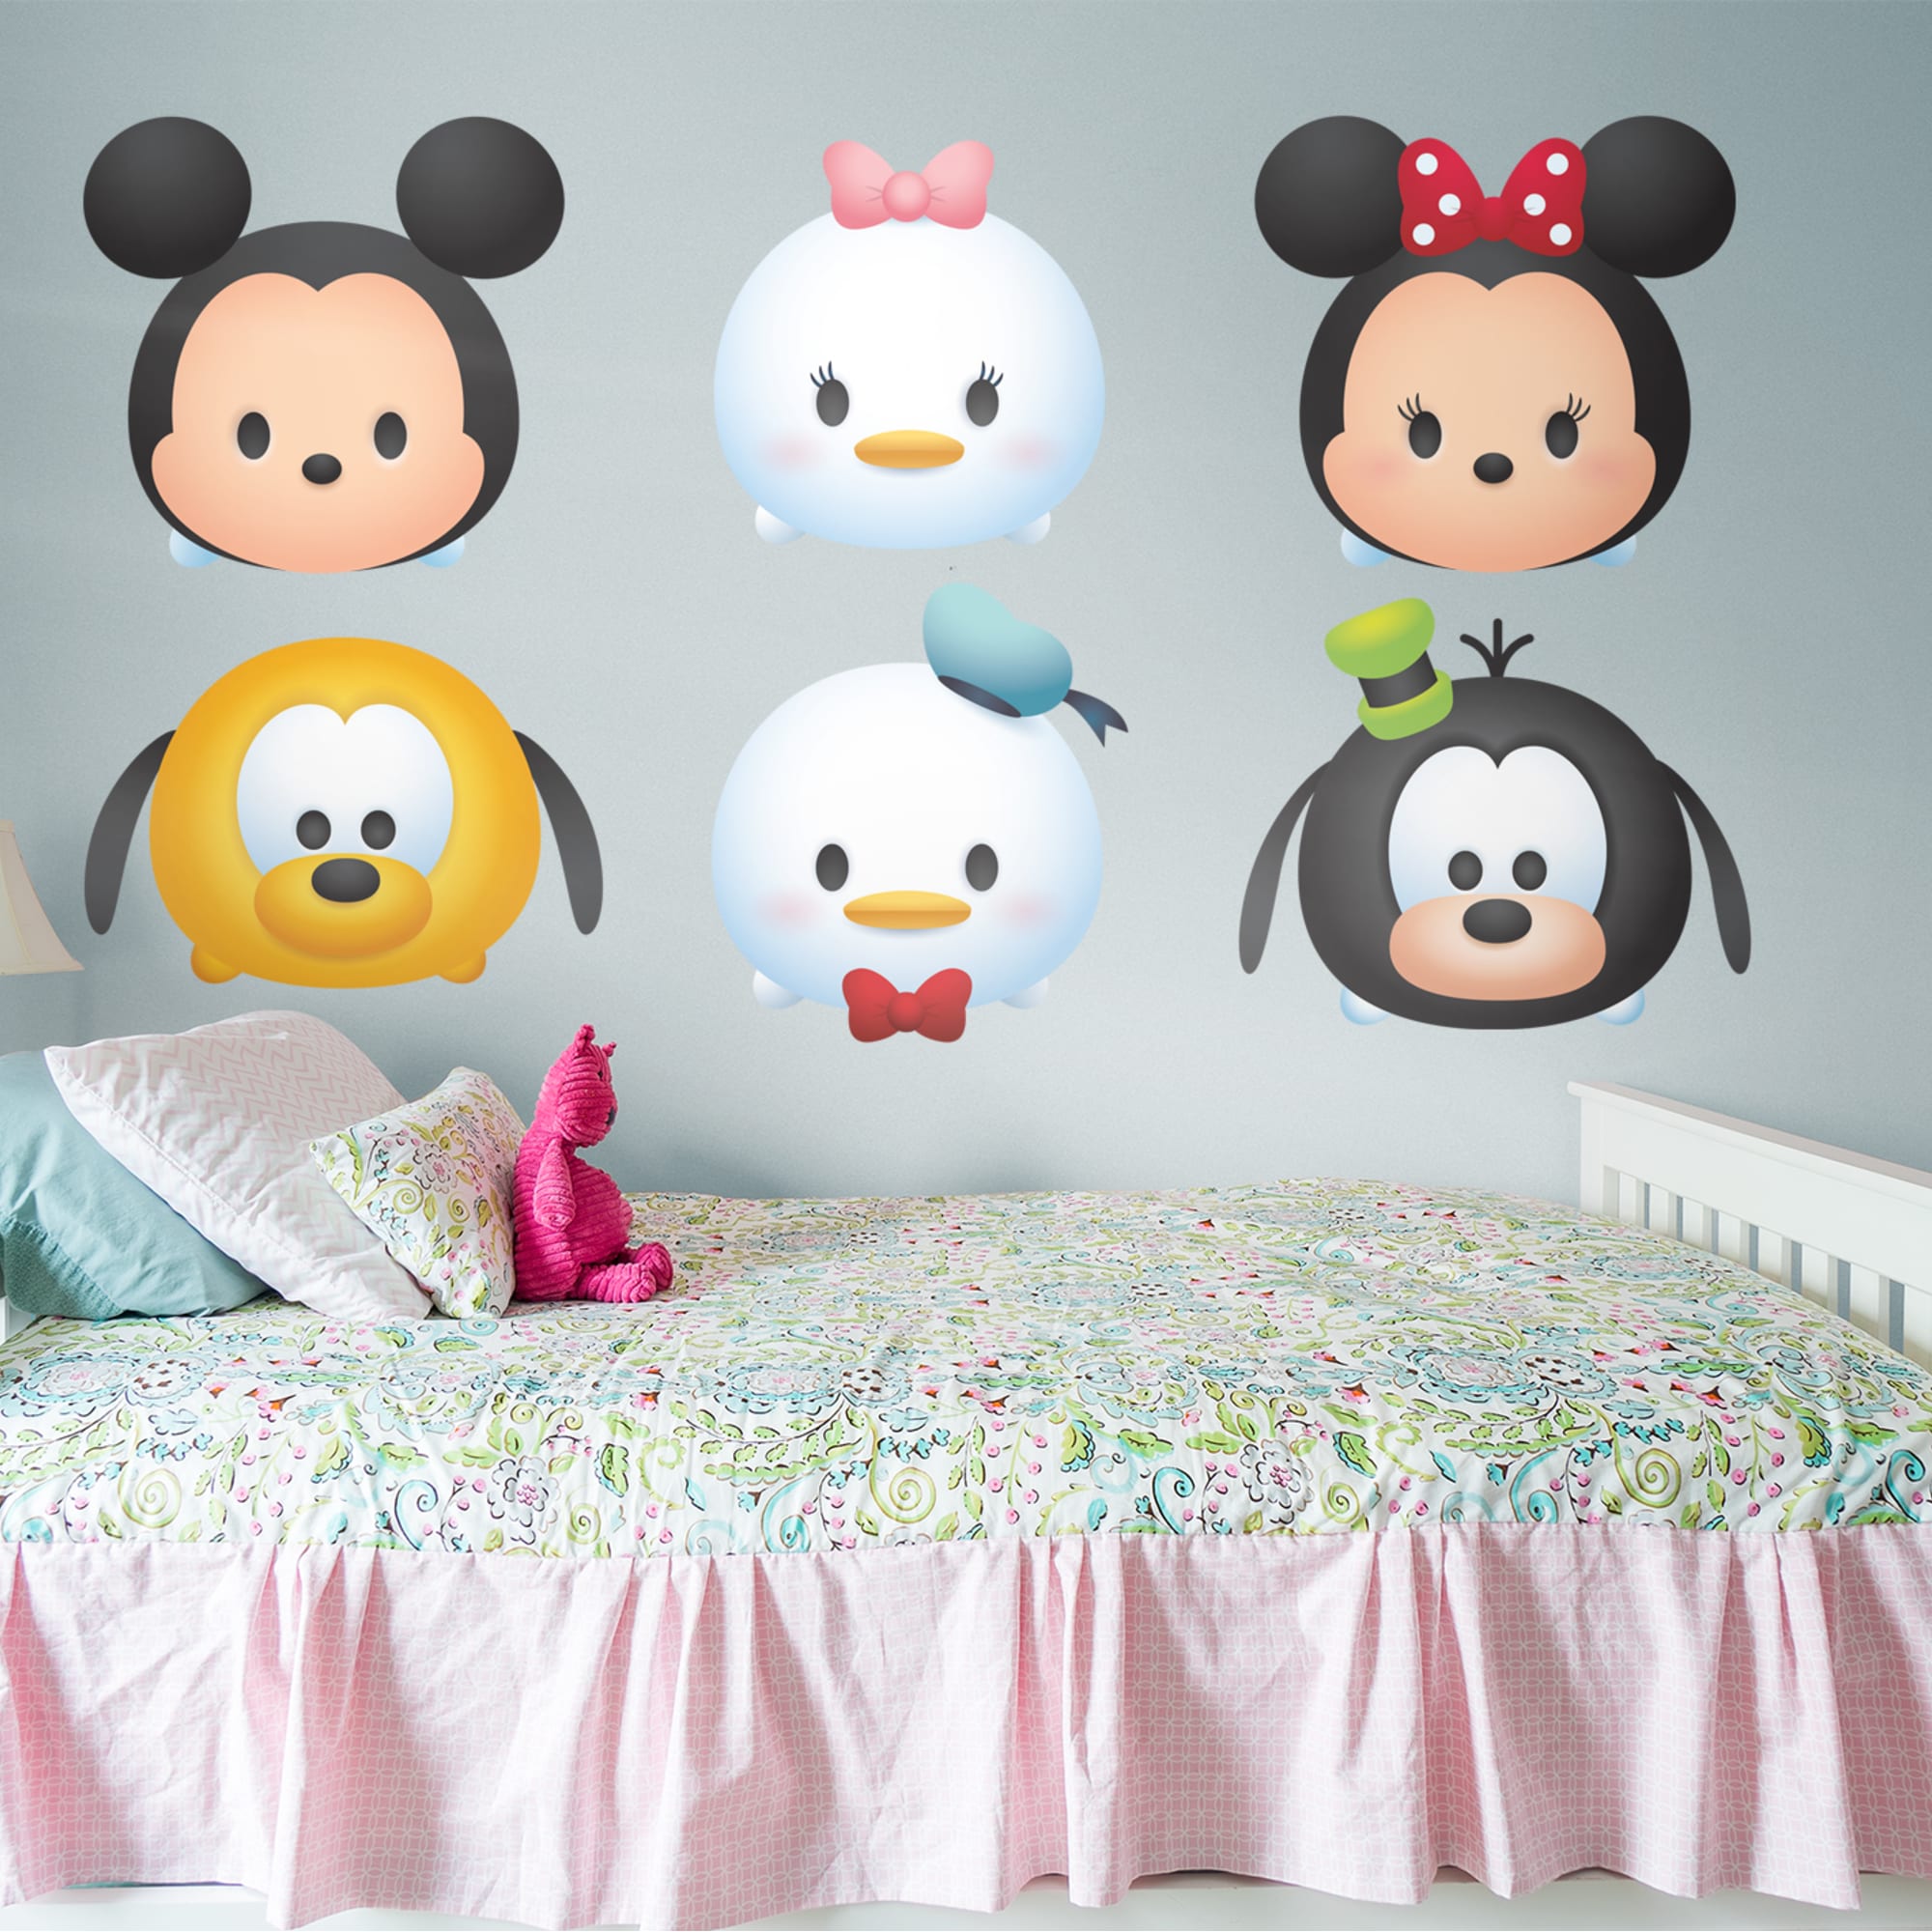 Mickey and Friends: Tsum Tsum Collection - Officially Licensed Disney Removable Wall Decals 80.0"W x 53.0"H by Fathead | Vinyl